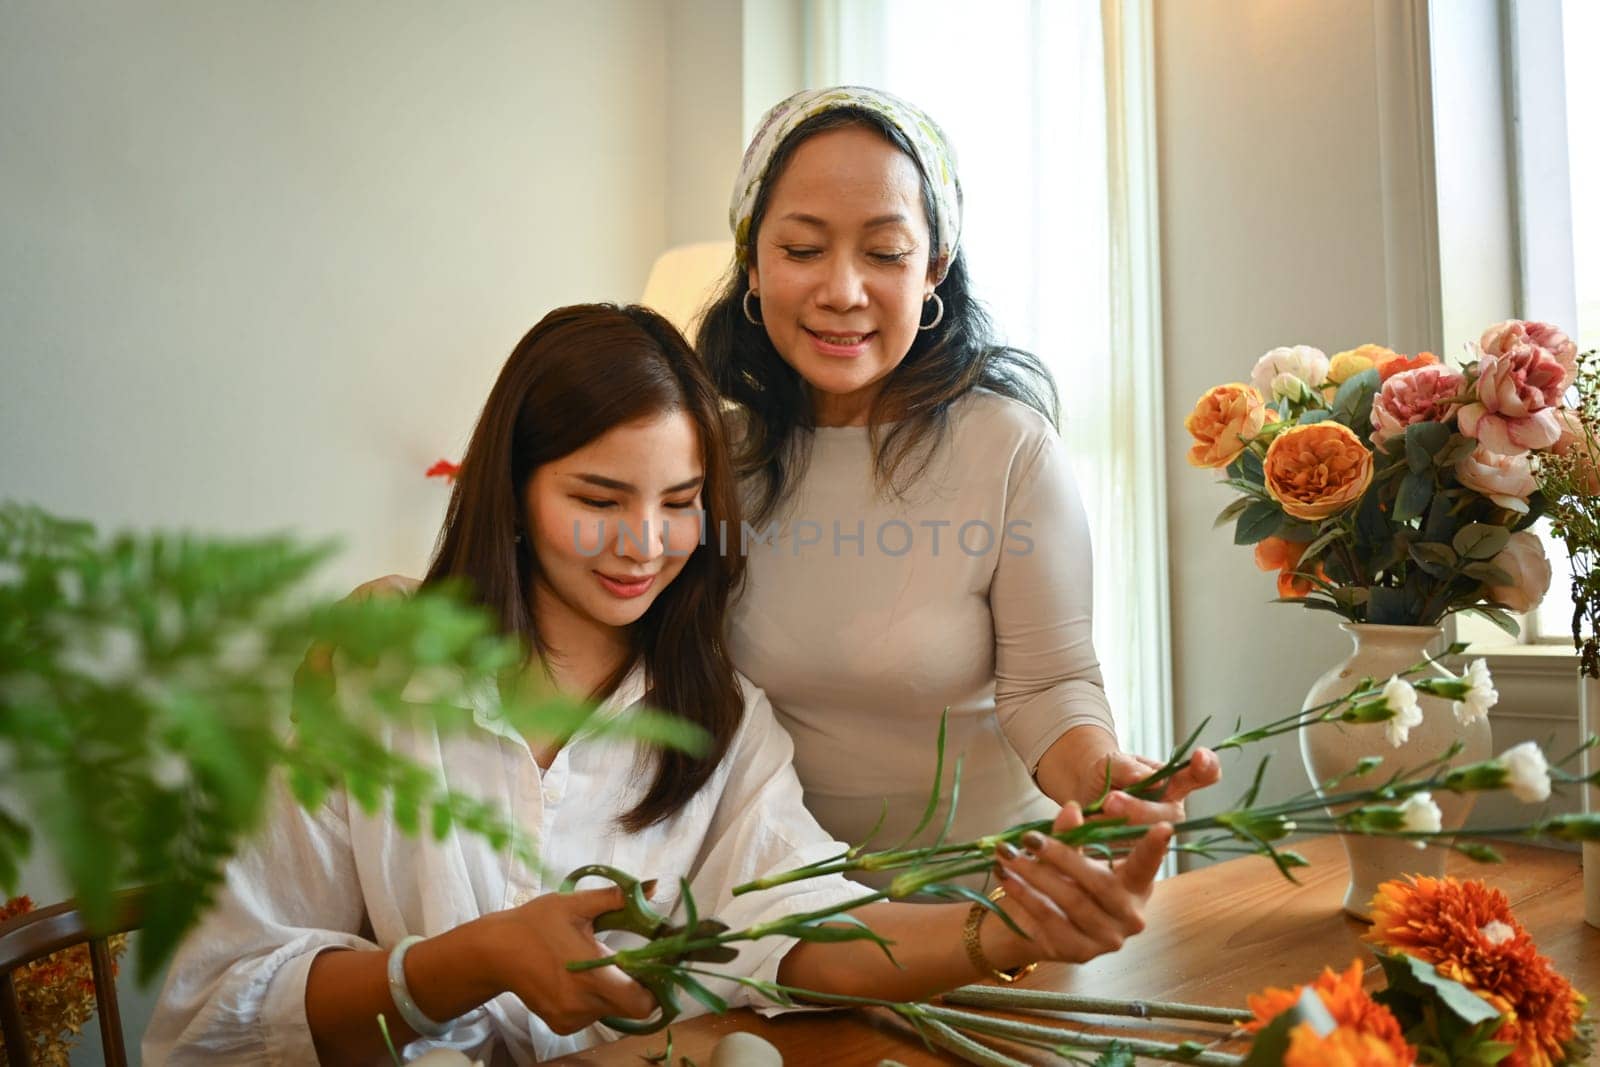 Family and leisure activity concept. Shot of senior woman and adult daughter creating beautiful bouquet in living room by prathanchorruangsak